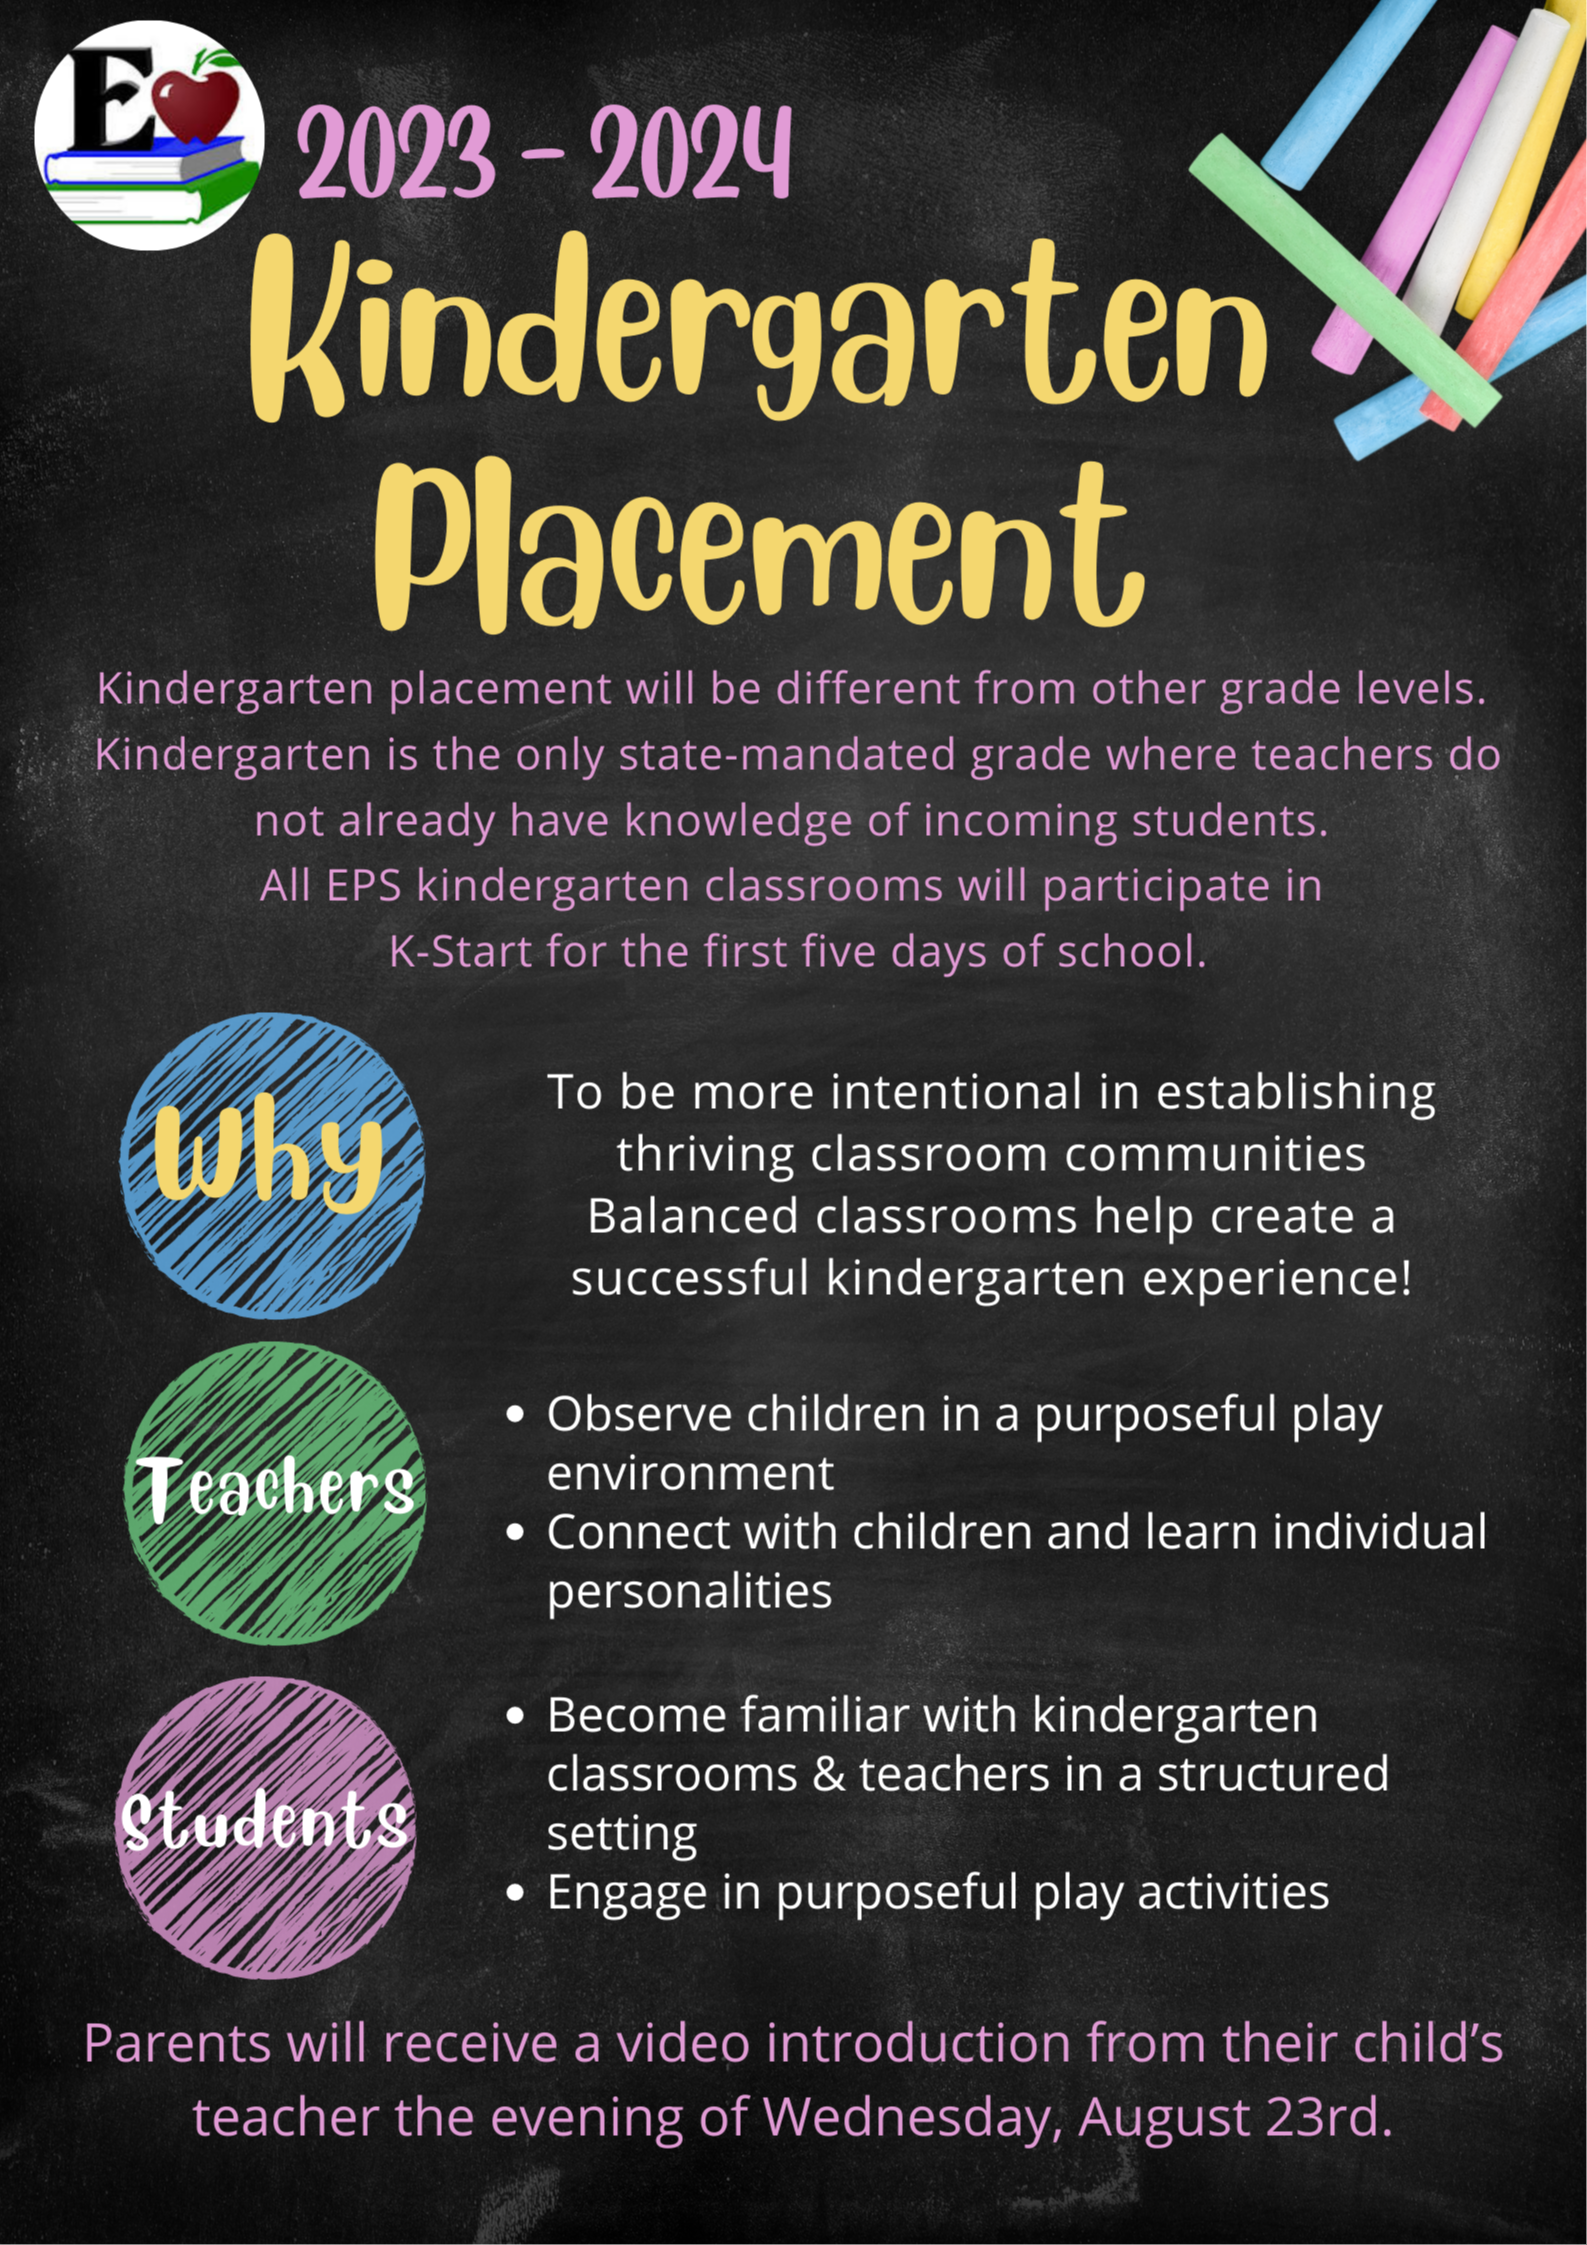 Kindergarten placement will be different from other grade levels. Kindergarten is the only state-mandated grade where teachers do not already have knowledge of incoming students. All EPS kindergarten classrooms will participate in K-Start for the first five days of school. dhy To be more intentional in establishing thriving classroom communities Balanced classrooms help create a successful kindergarten experience! Teachers • Observe children in a purposeful play environment • Connect with children and learn individual personalities a • Become familiar with kindergarten classrooms & teachers in a structured setting • Engage in purposeful play activities Parents will receive a video introduction from their child's teacher the evening of Wednesday, August 23rd.